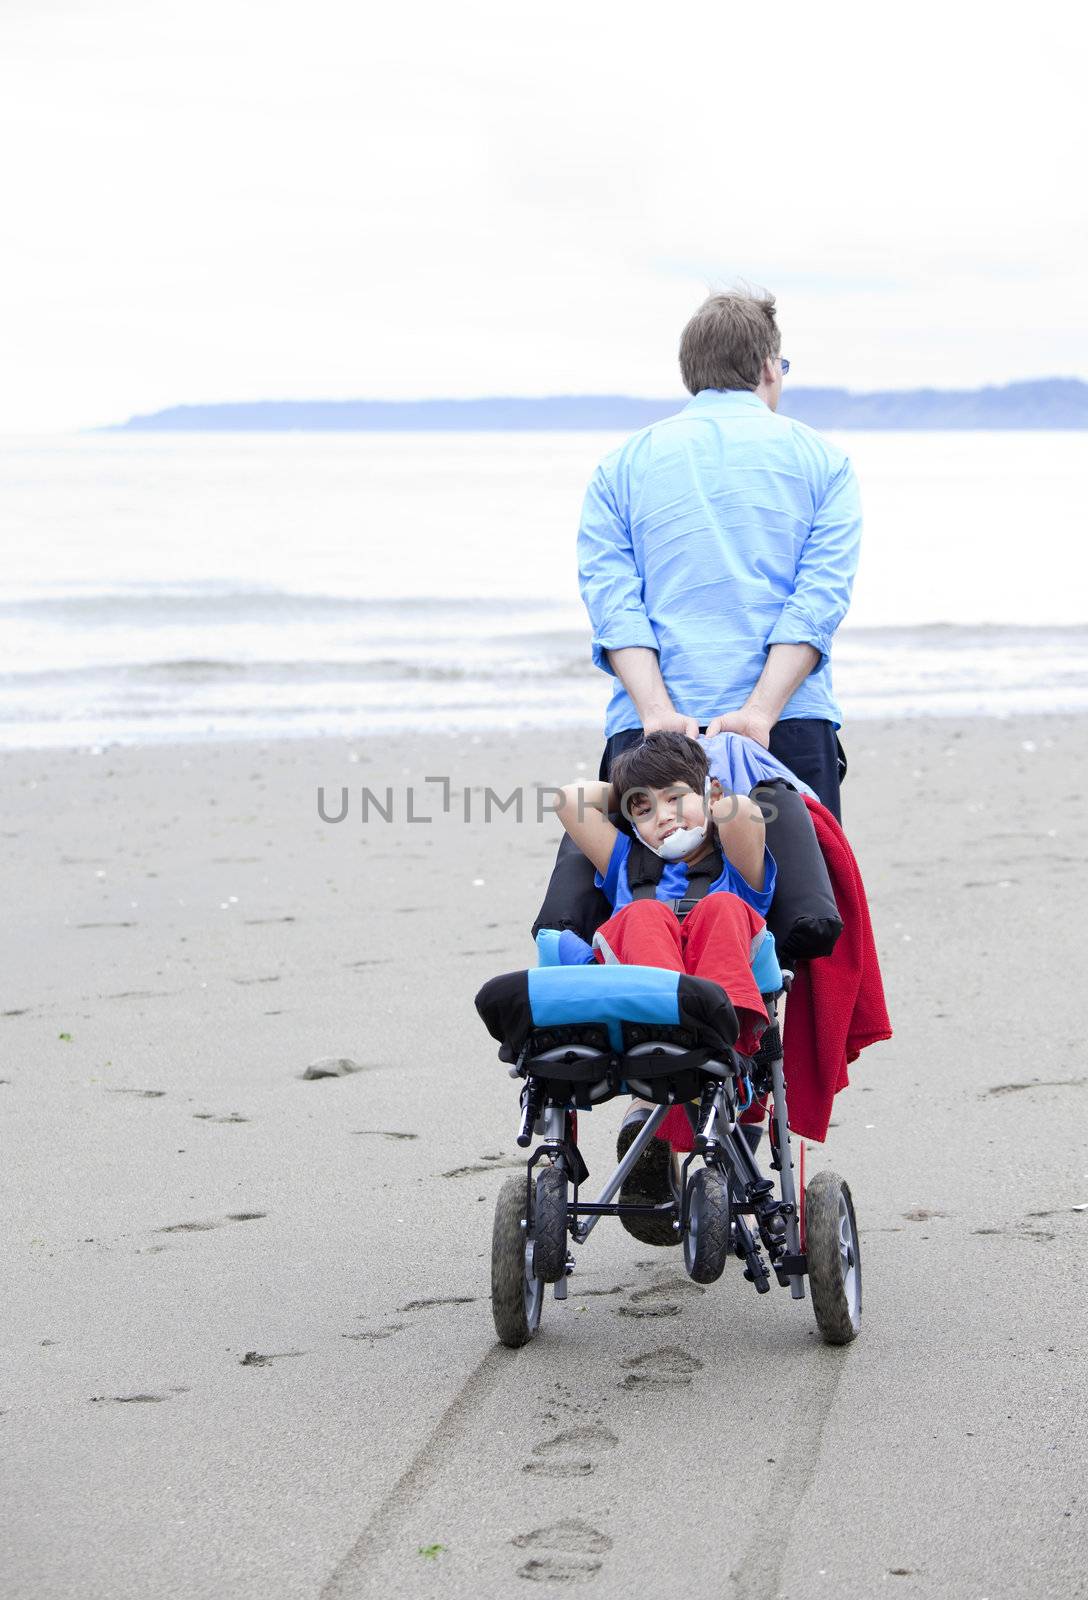 Disabled boy relaxes in wheelchair as father pulls it through the sandy beach